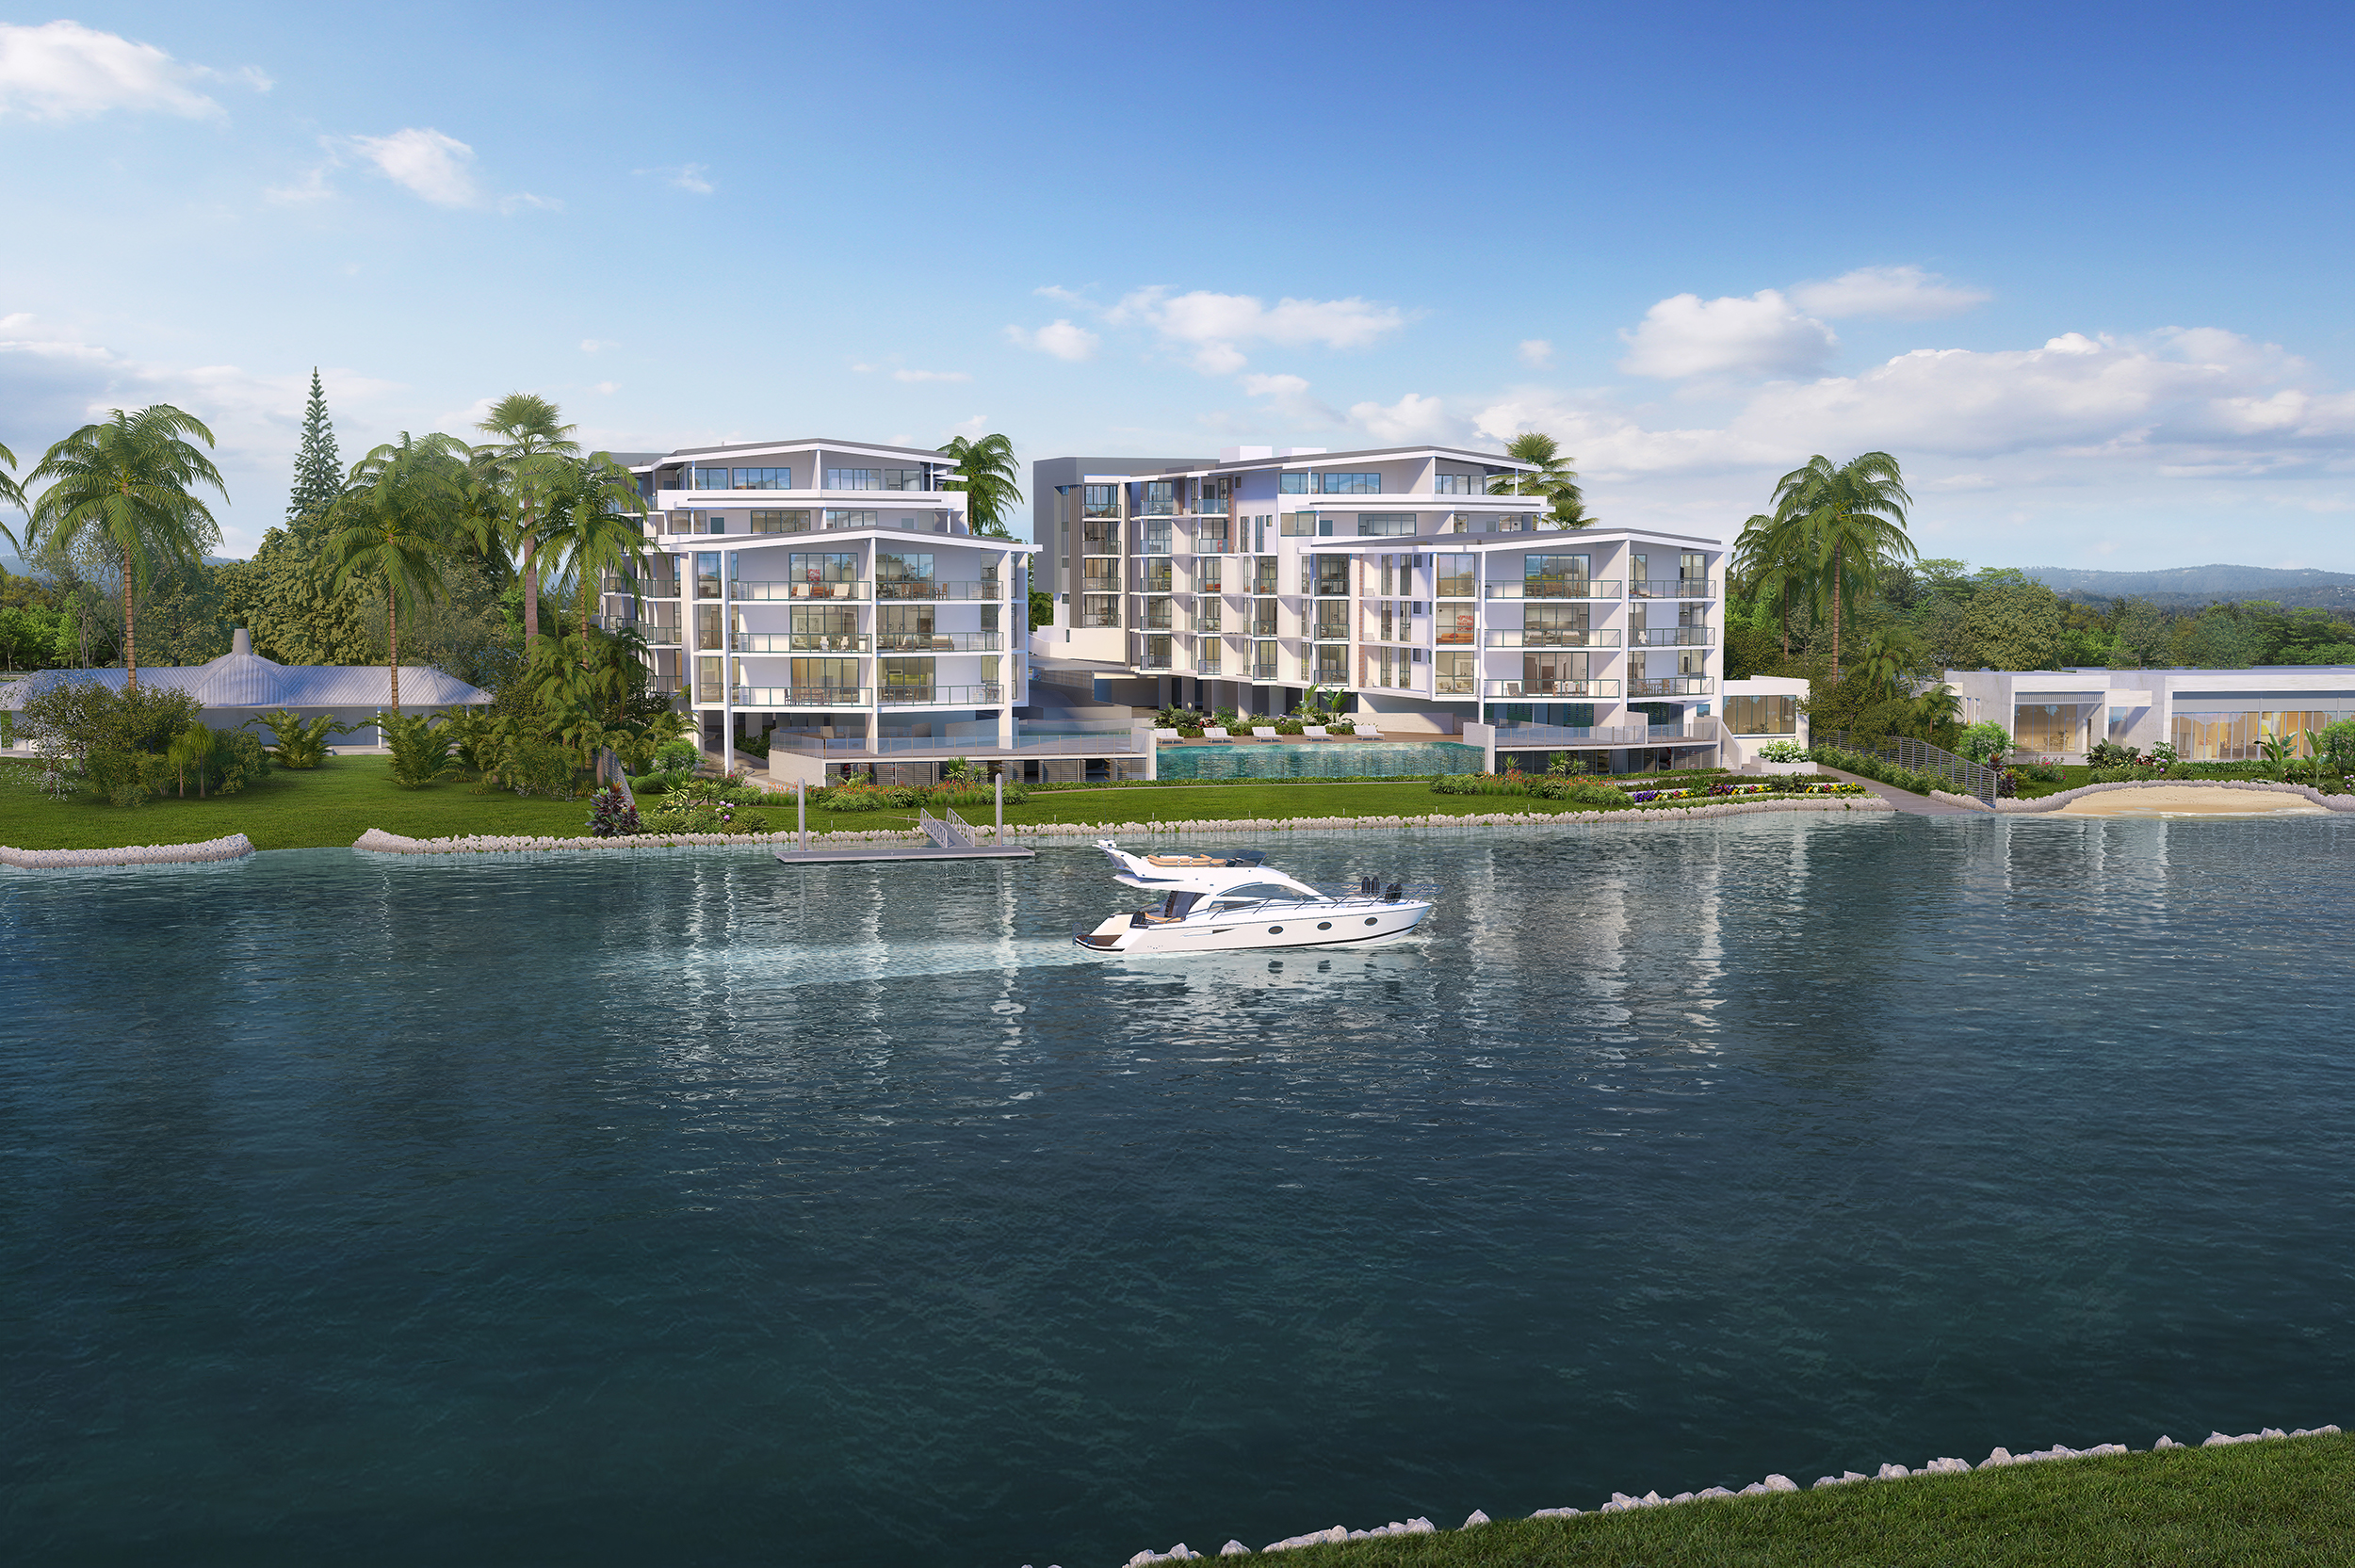 View across the river towards the apartment development showcasing the proximity to the water